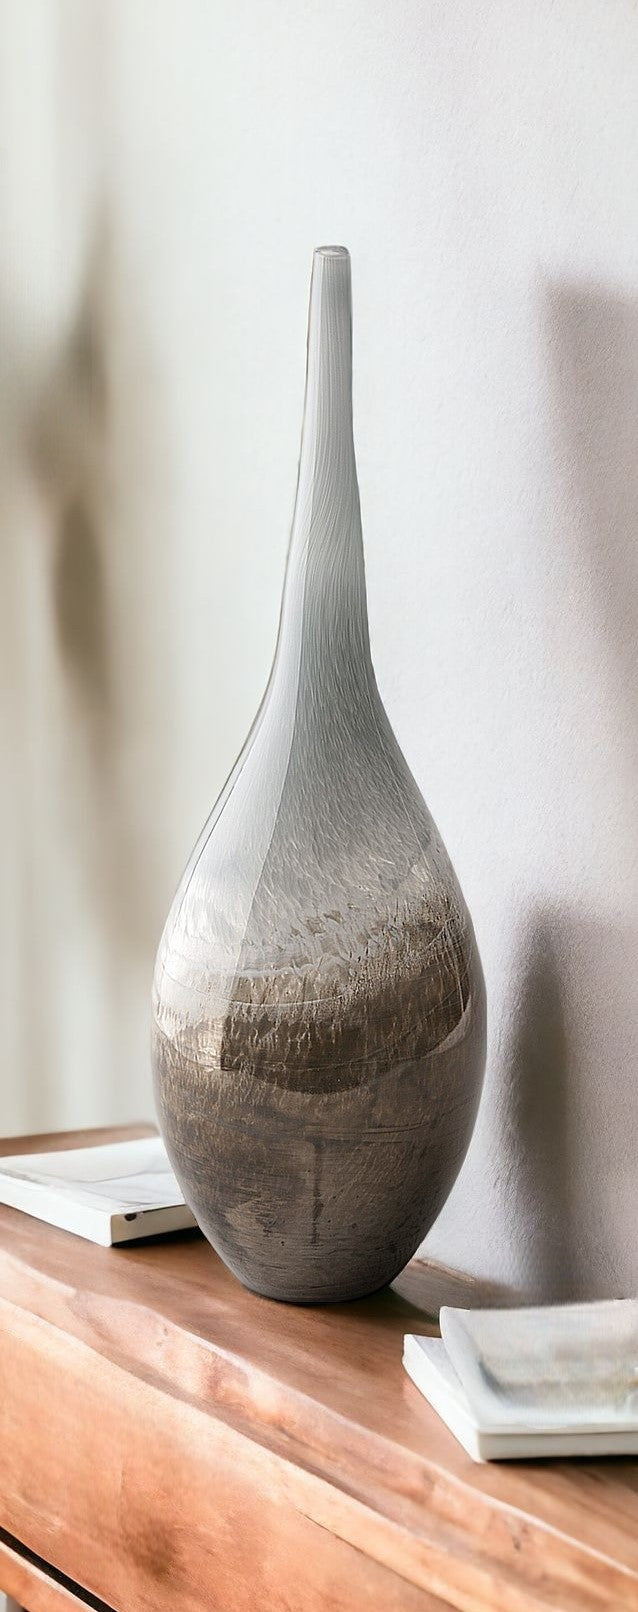 21" Heavenly Taupe and Gray Handblown Spunglass Vase